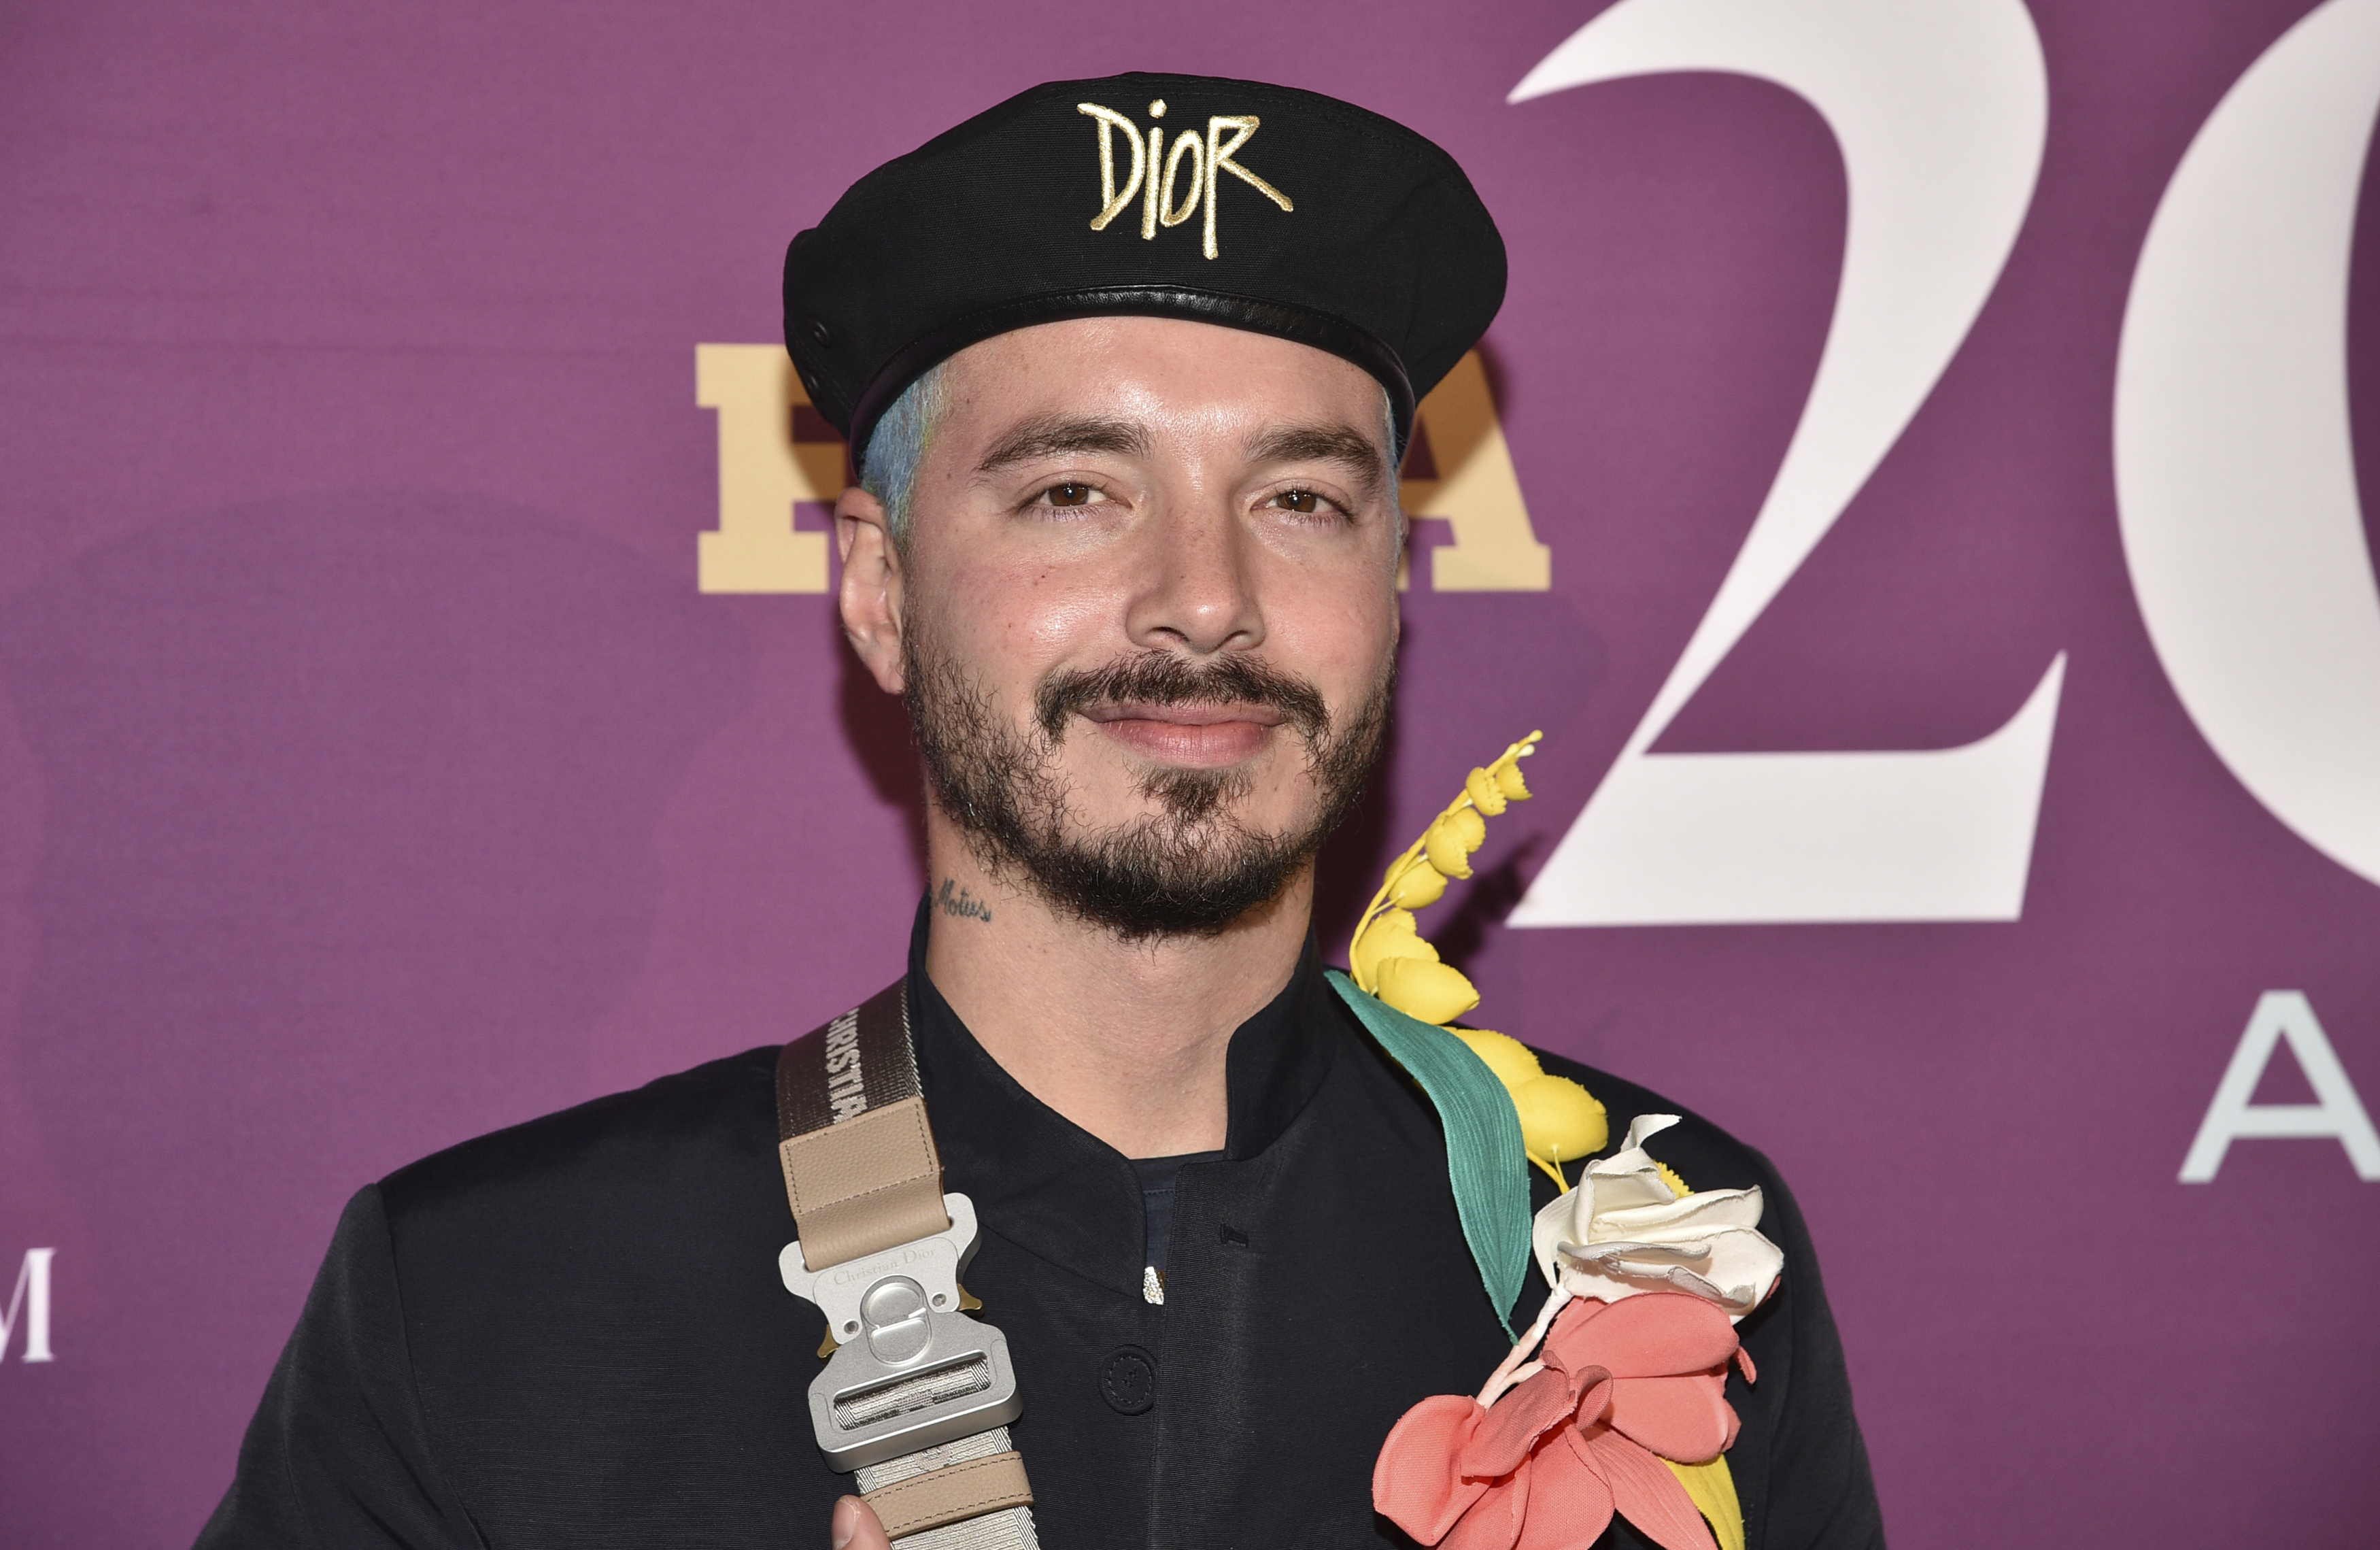 J Balvin Is Getting His Own McDonald's Meal & Twitter Is Going Wild